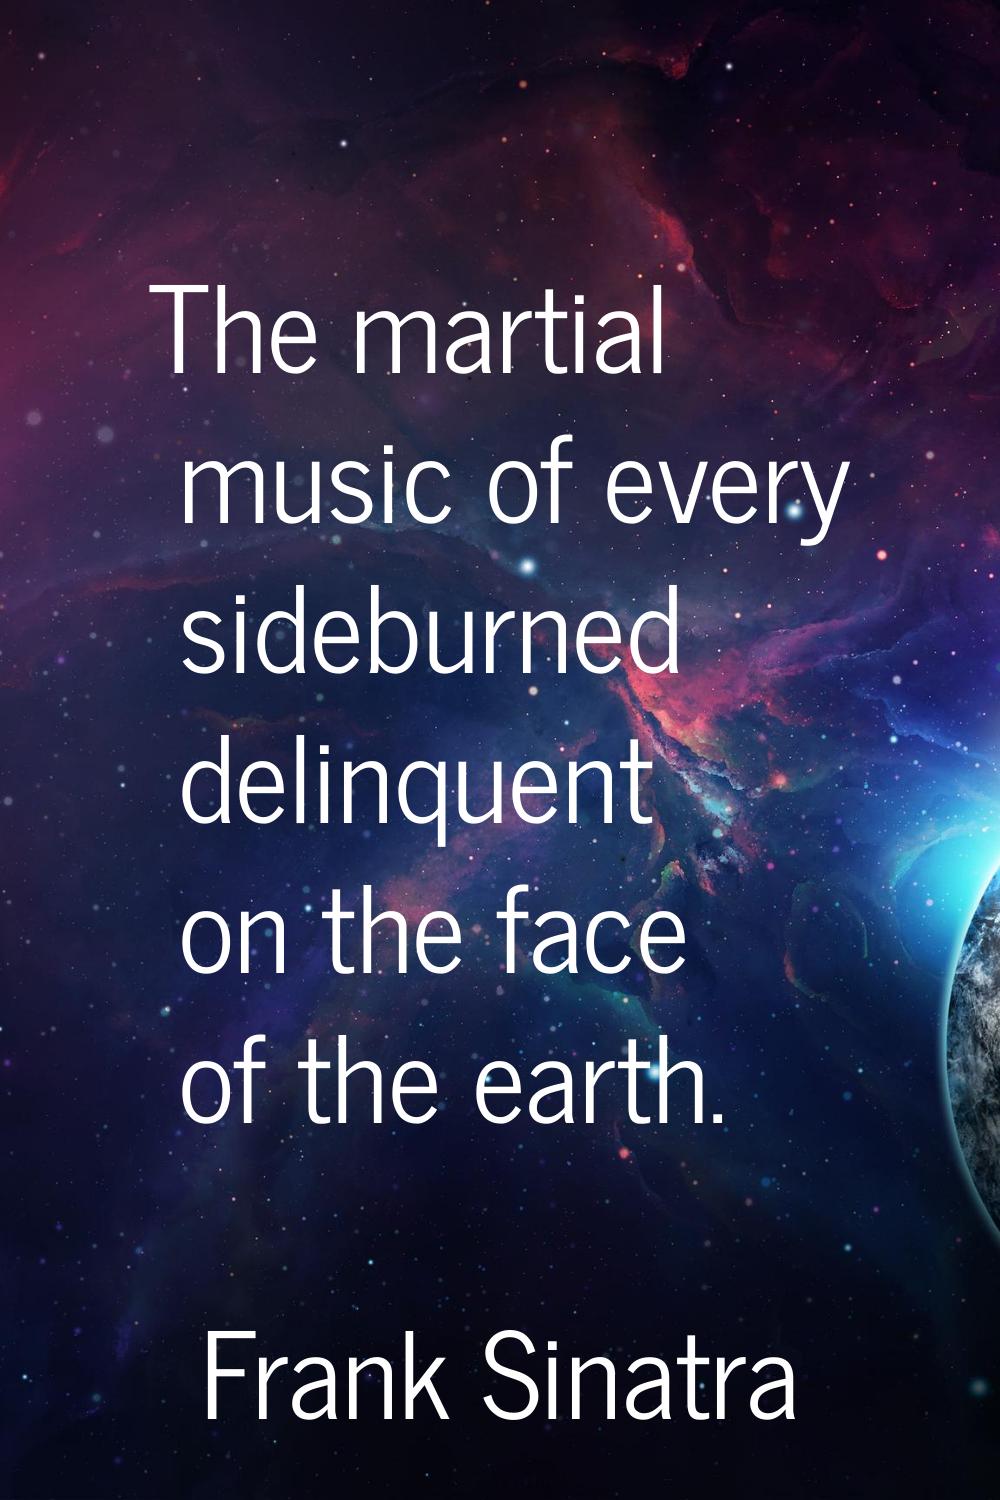 The martial music of every sideburned delinquent on the face of the earth.